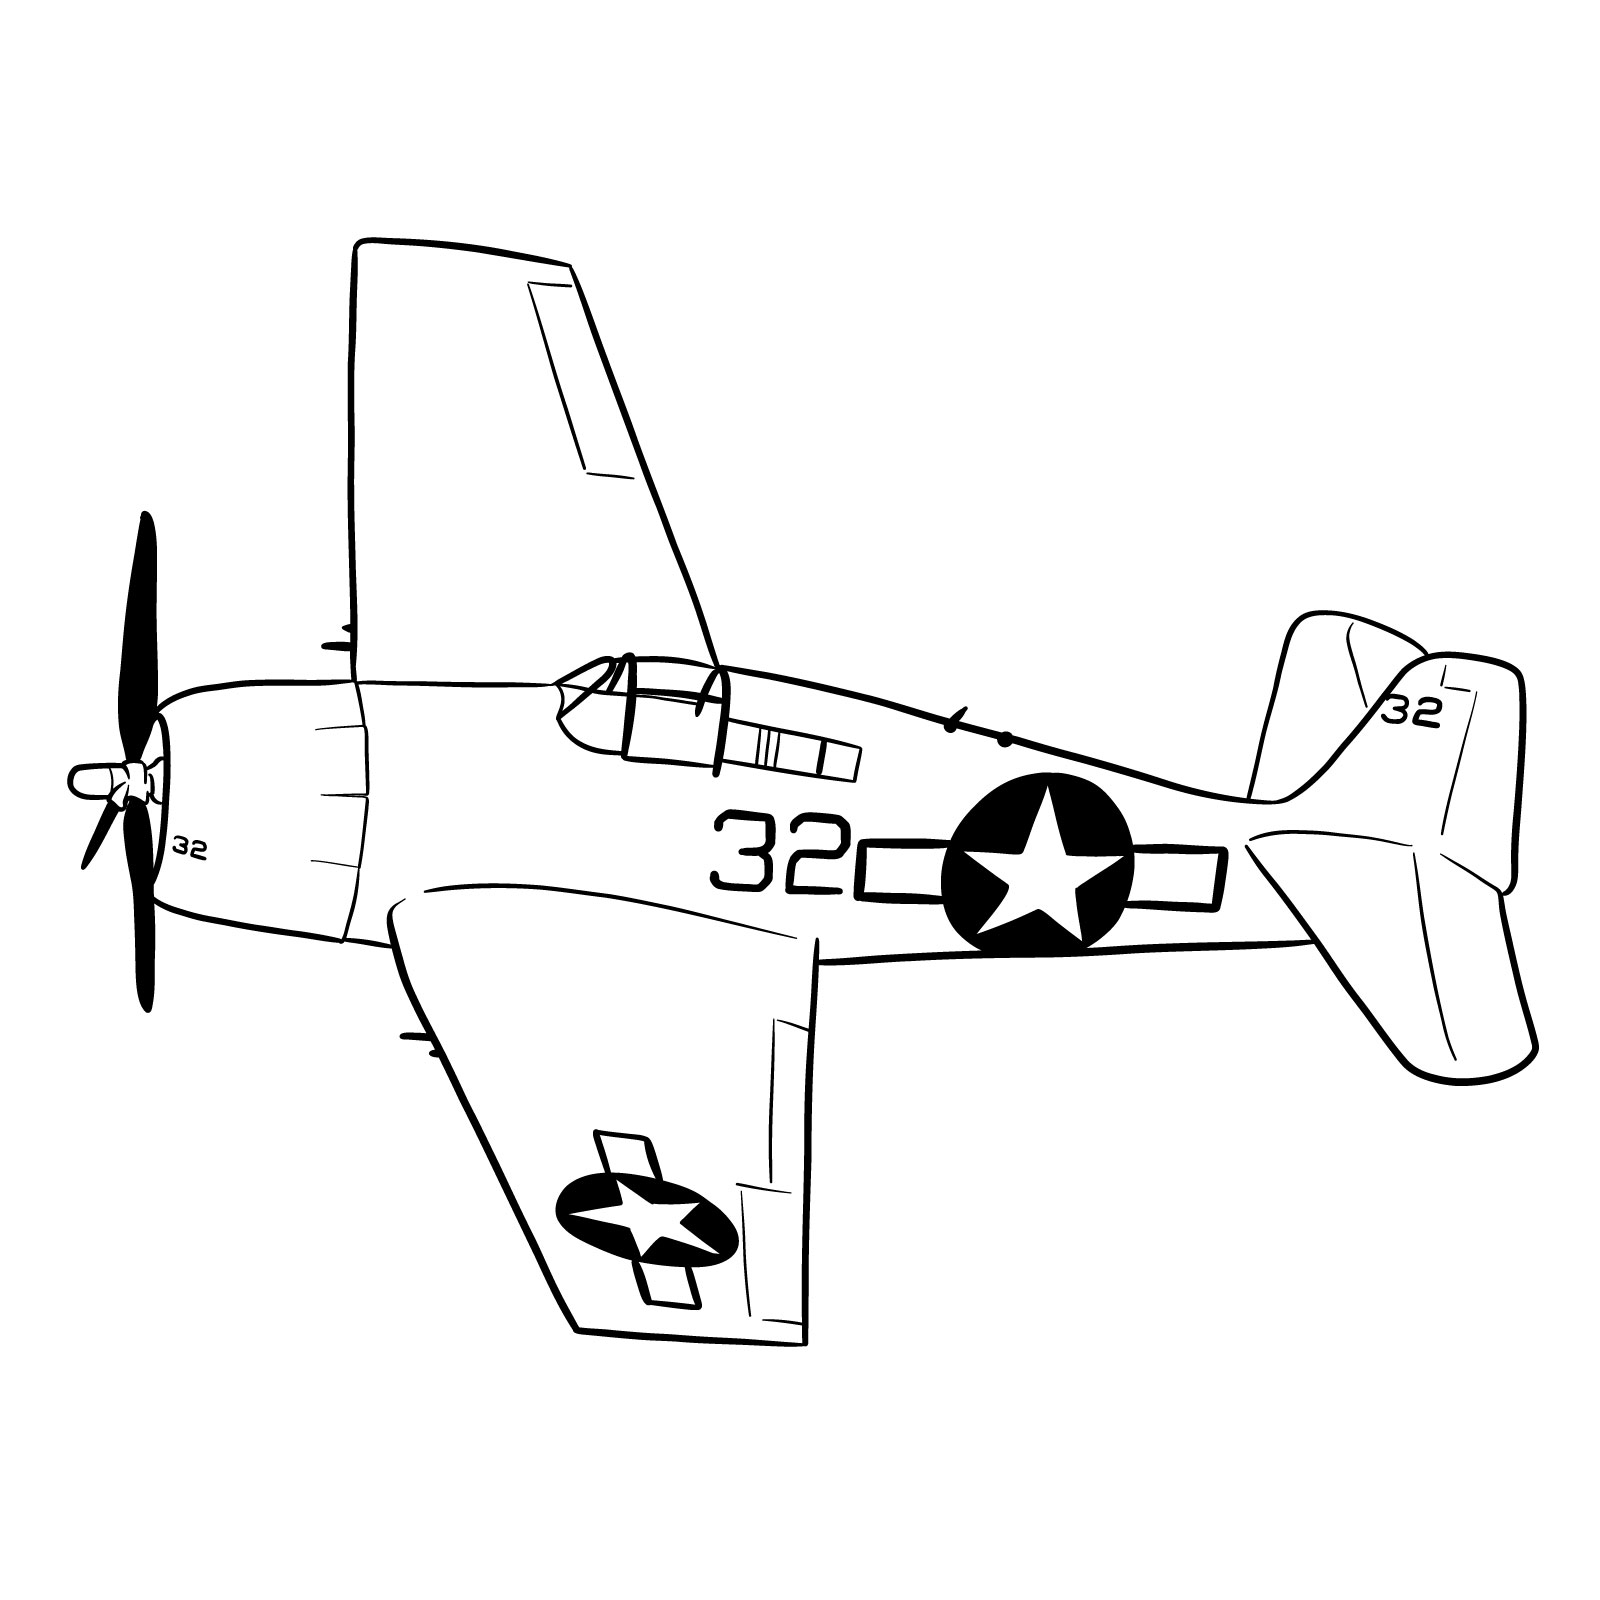 How to draw the F6F-5 Hellcat - Sketchok easy drawing guides